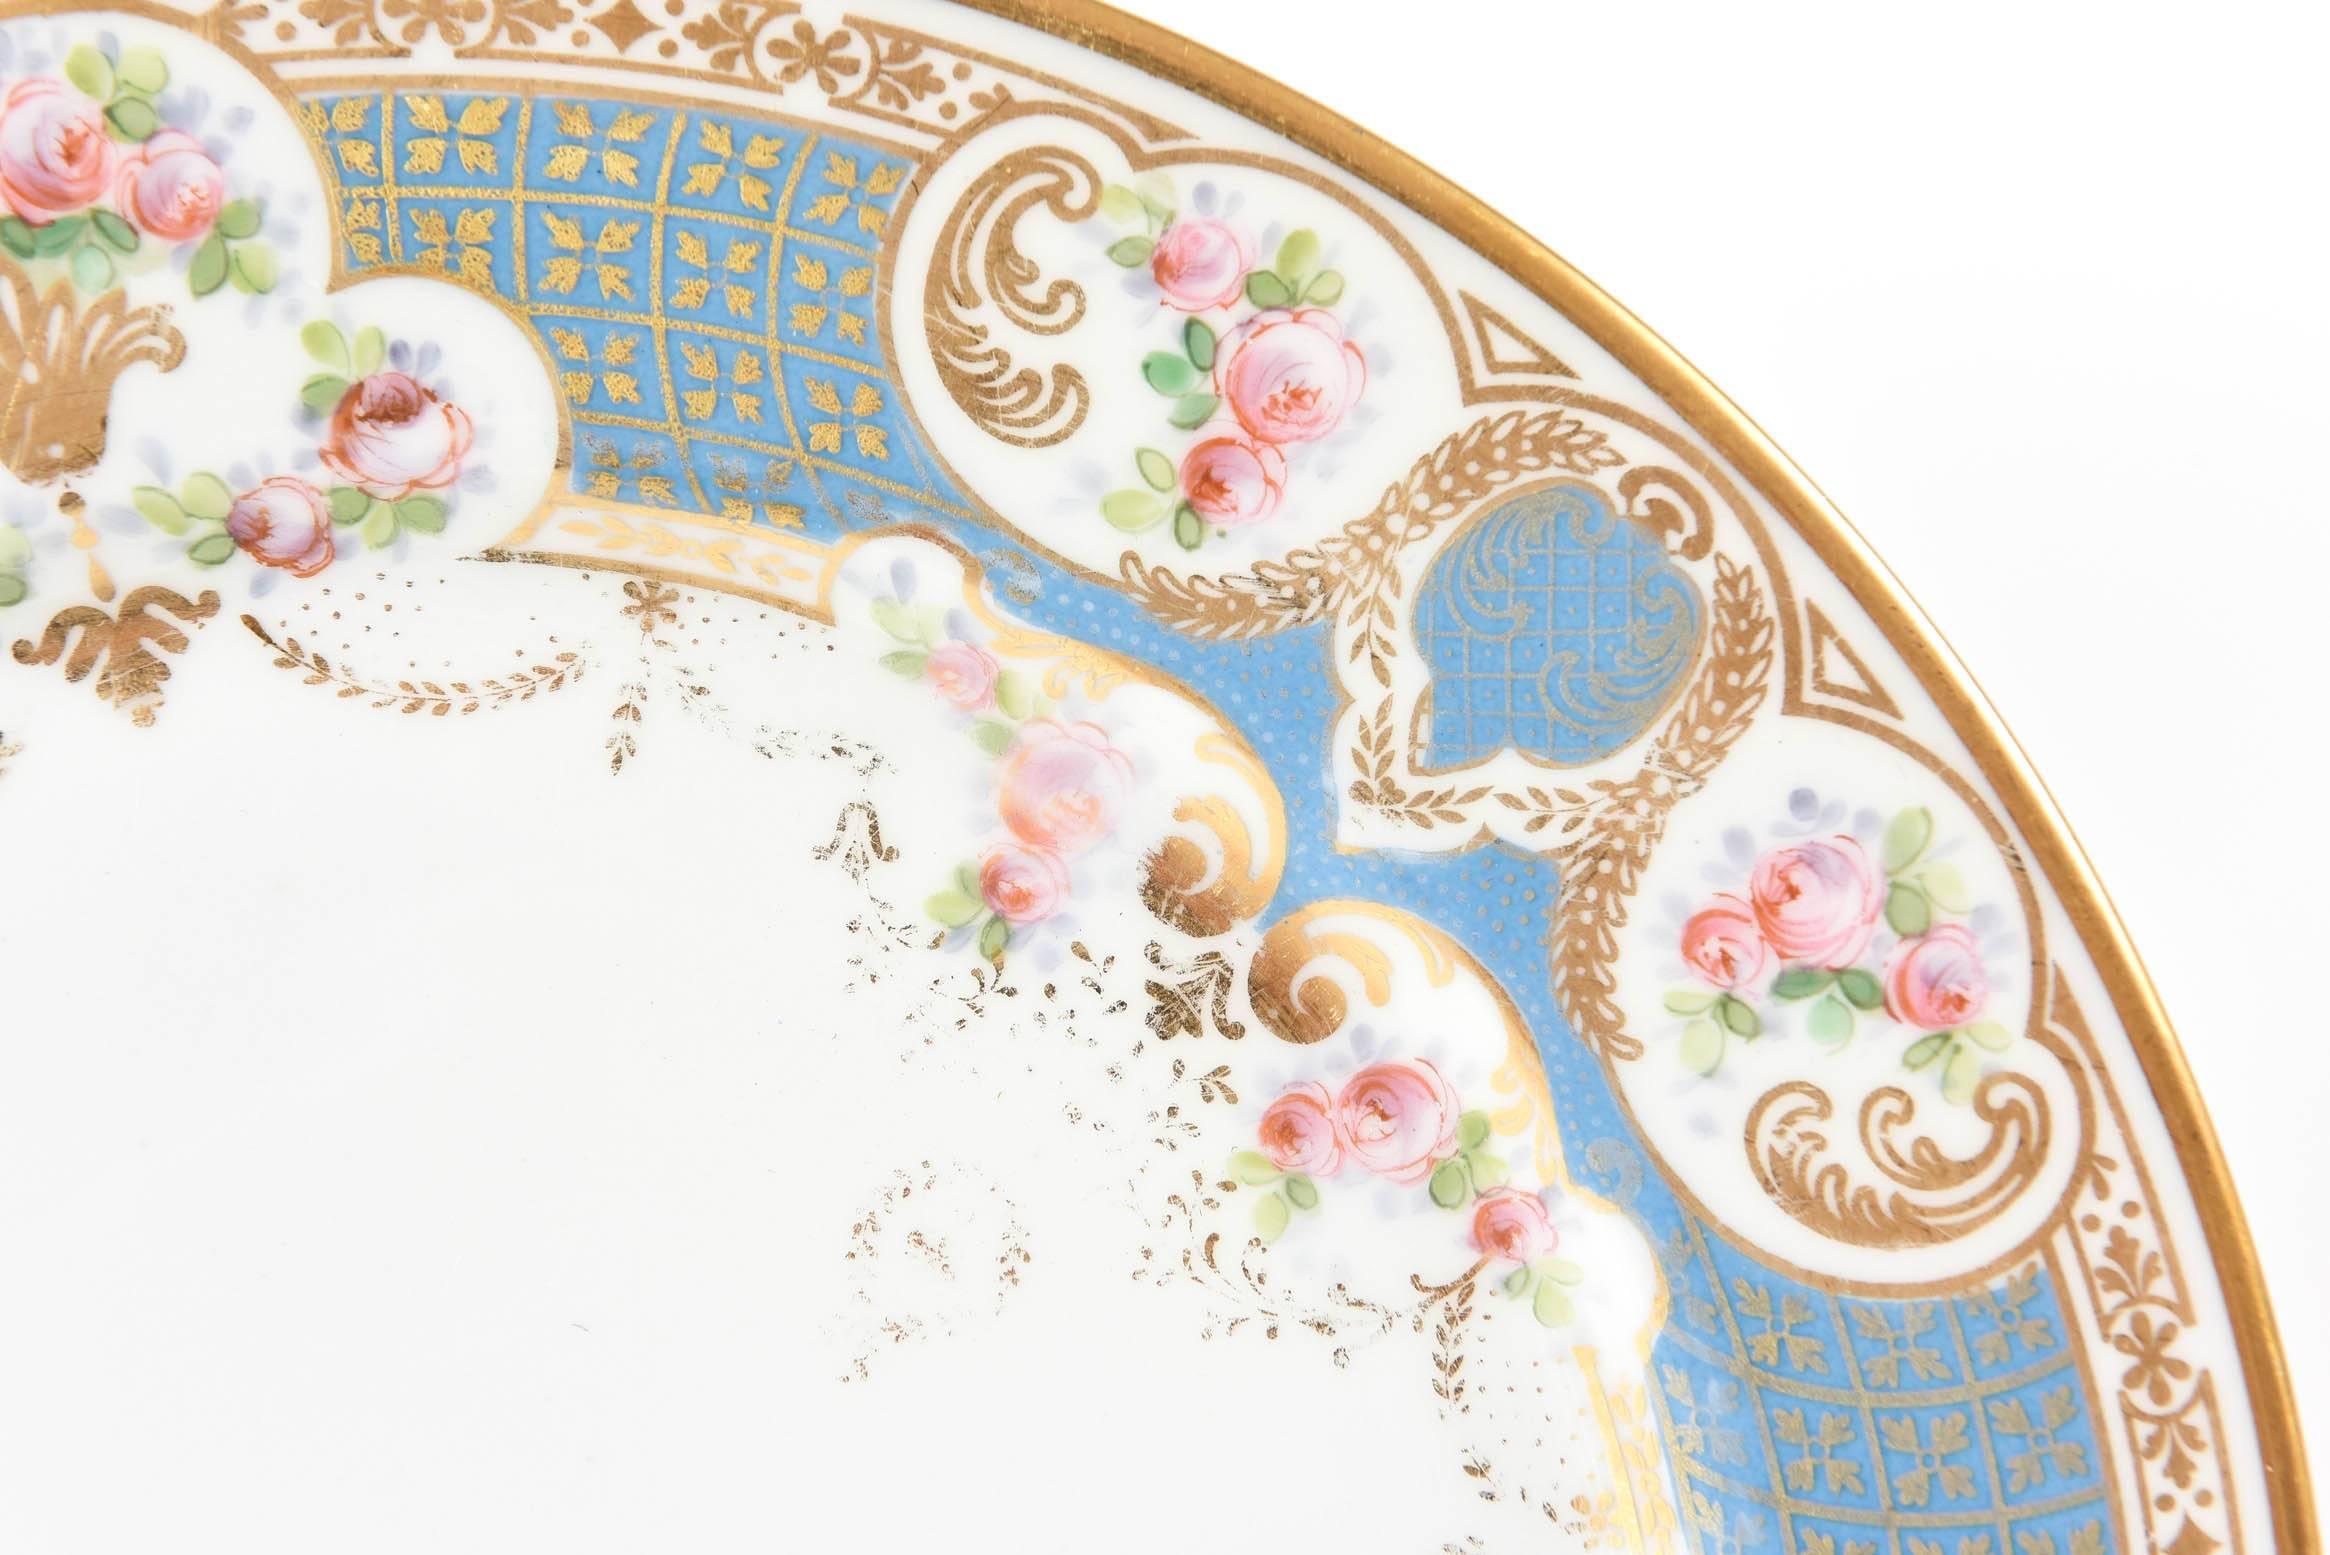 Napoleon Pretty Turquoise and Rose Pink Dinner Plates, Antique, circa 1900